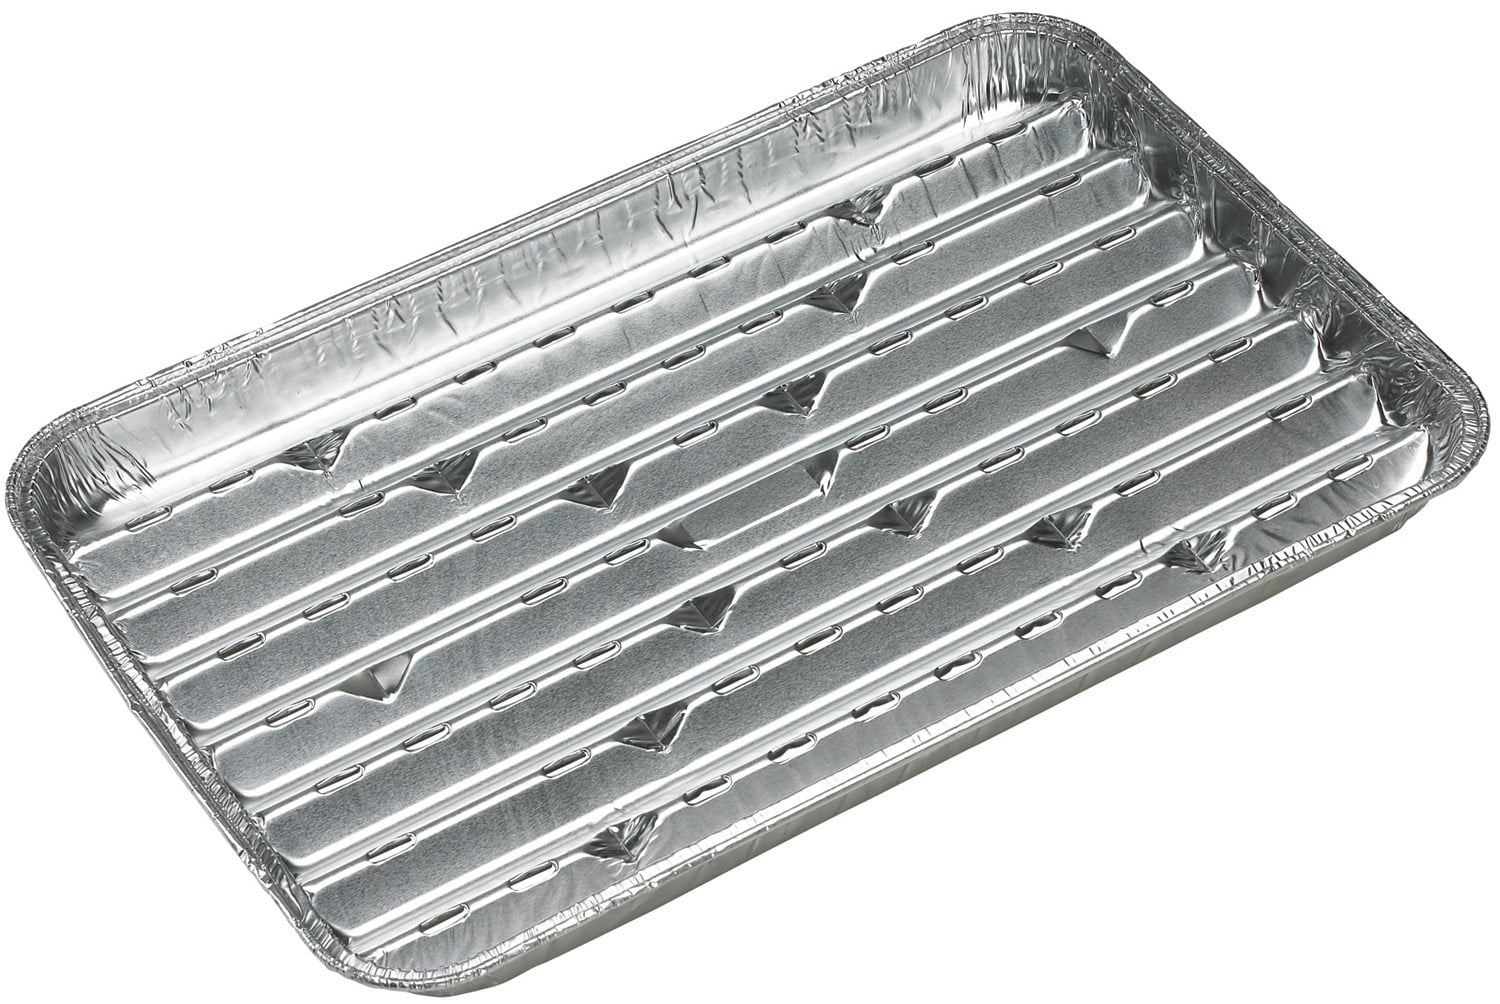 2500 or 3000 Drip Pan Tray Bottom Grate Ronco Compact Showtime Rotisserie Jr 